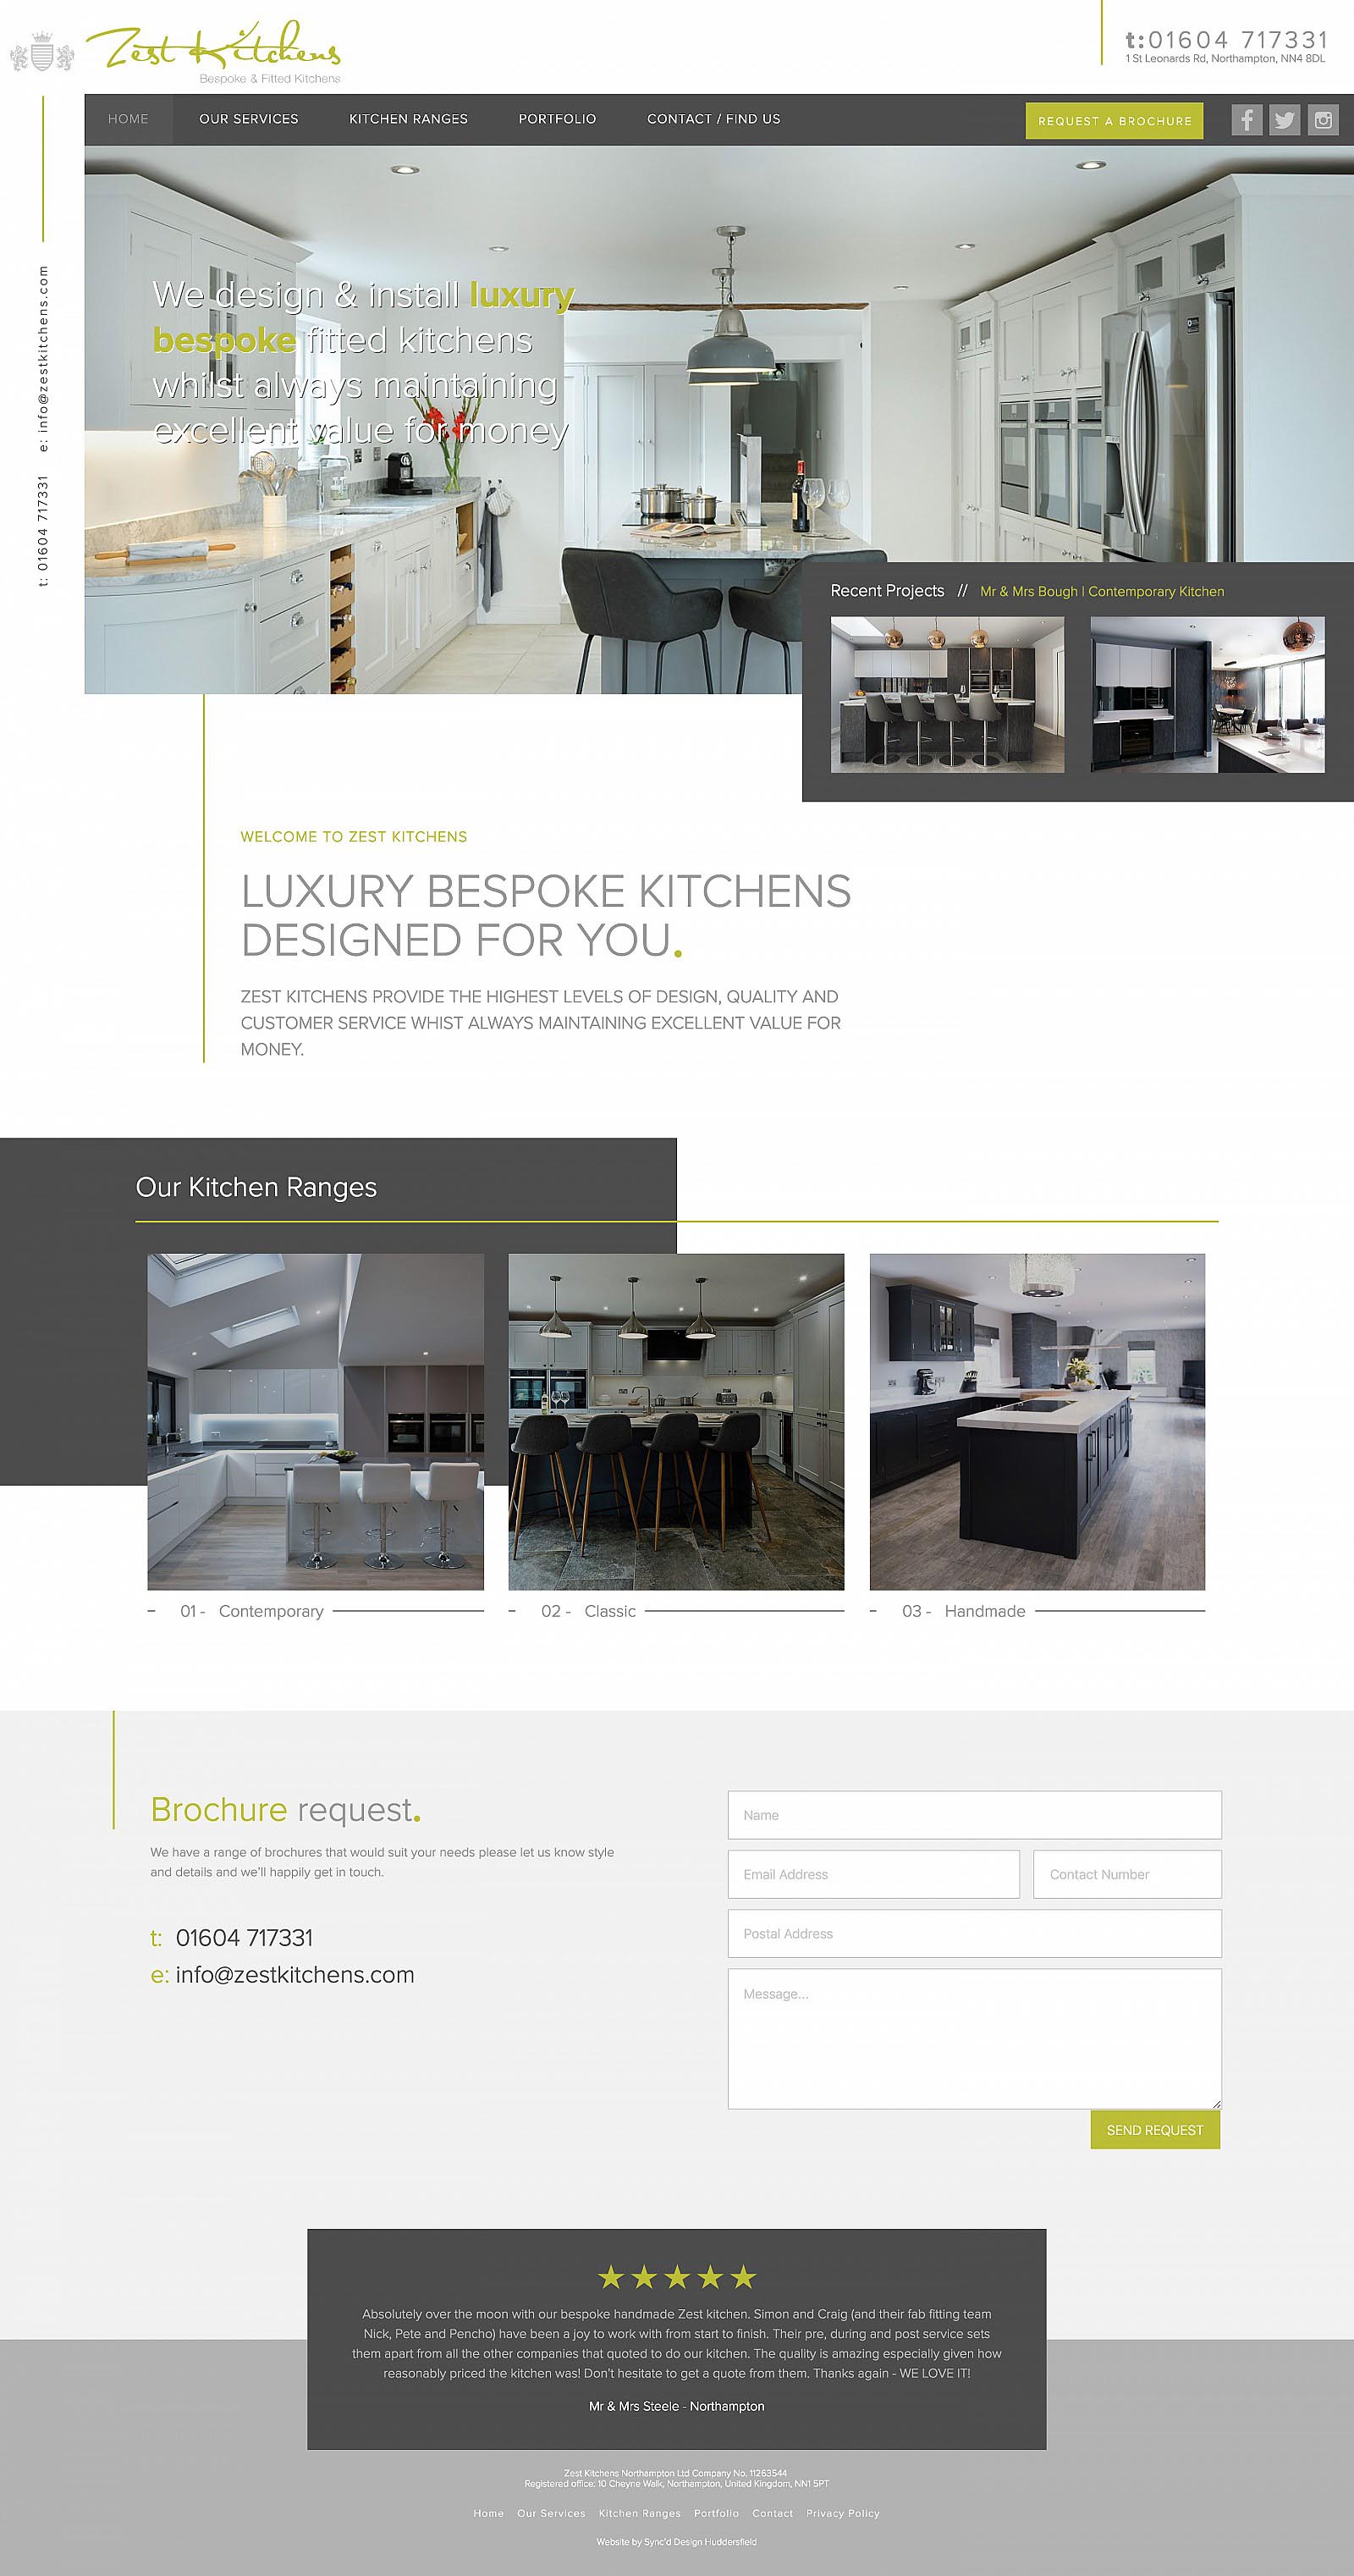 Zest Kitchens Home Page